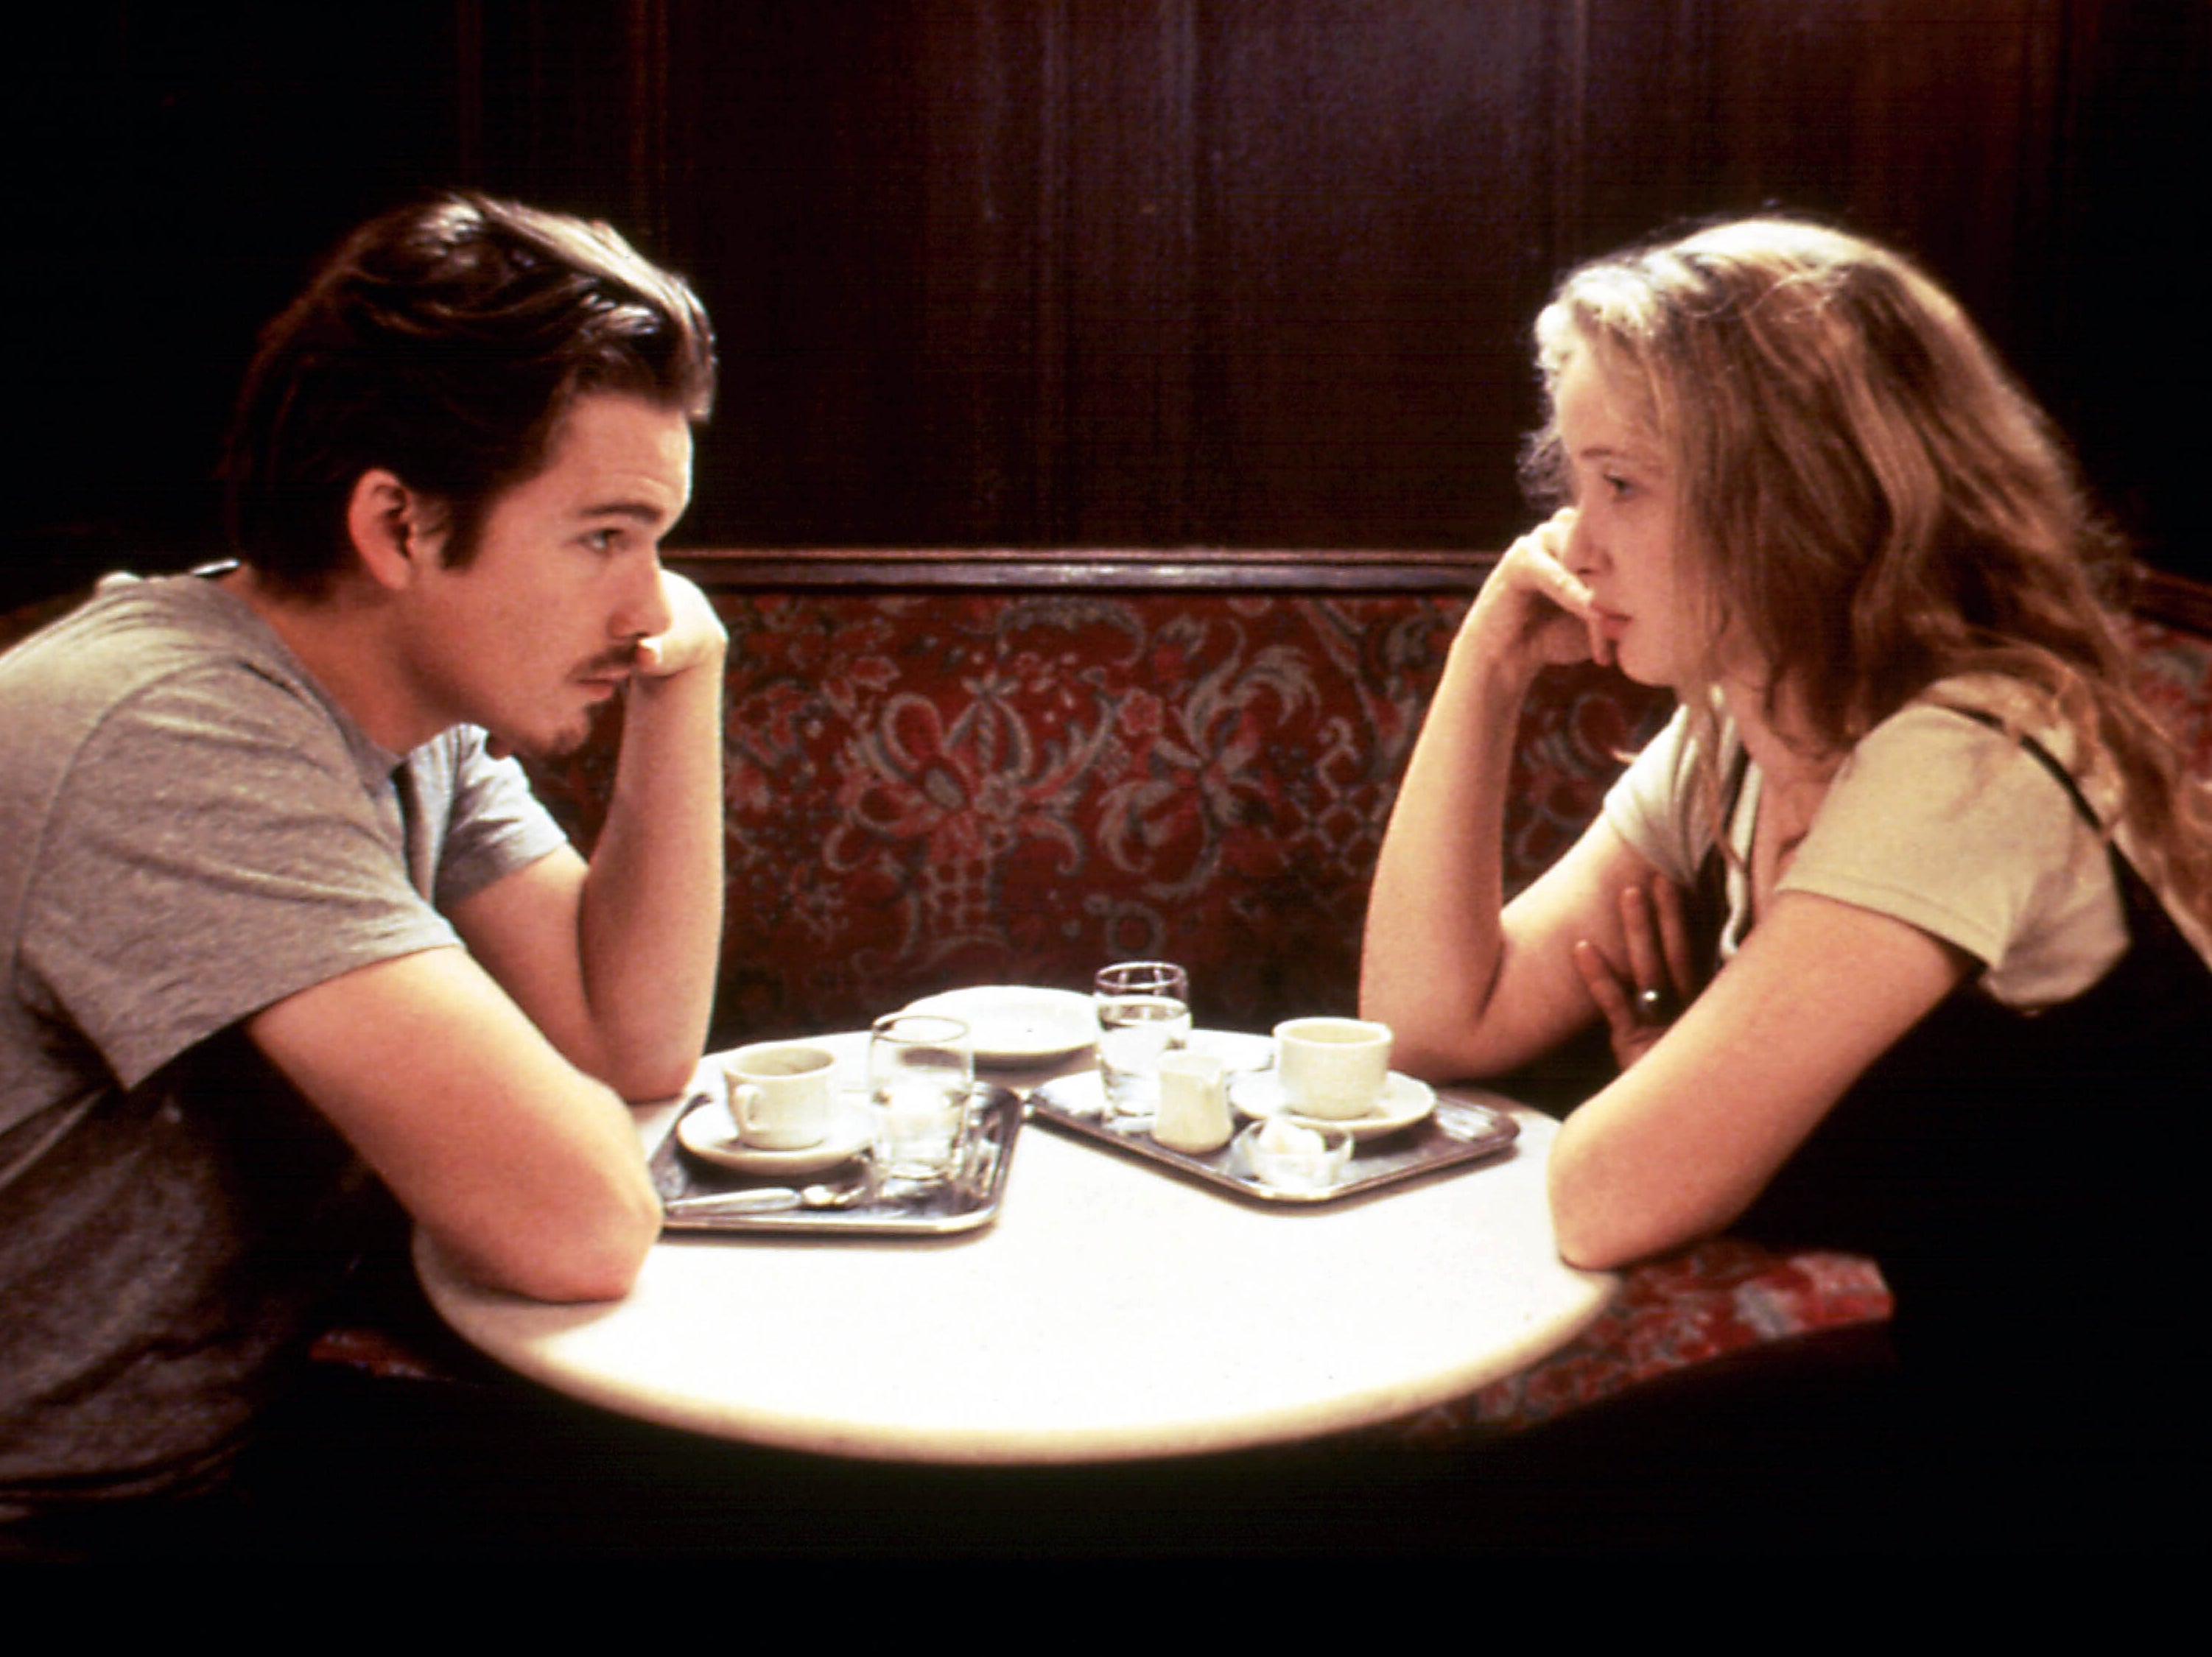 Ethan Hawke put a lot of himself into ‘Before Sunrise’, which co-starred Julie Delpy